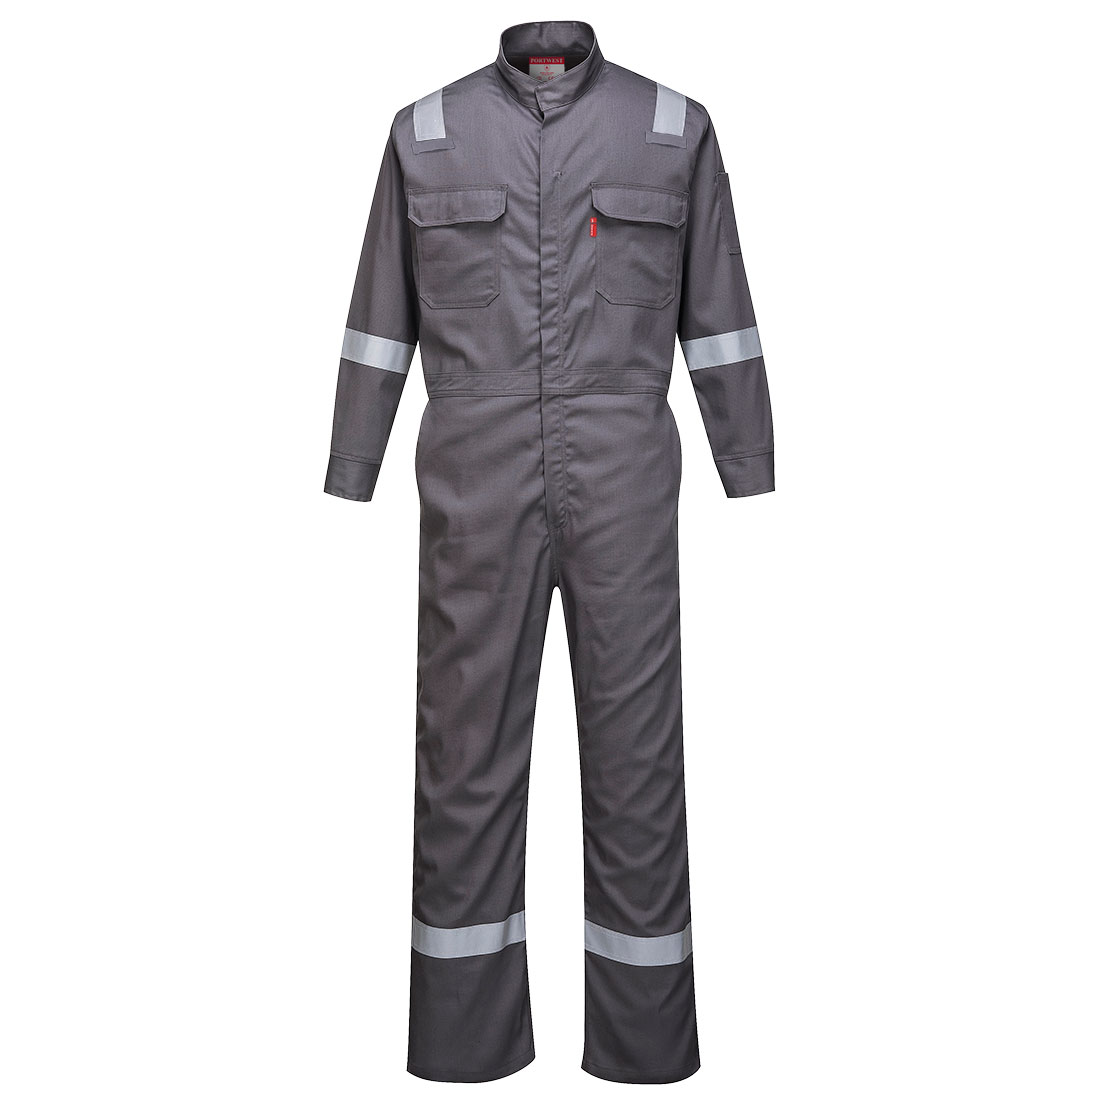 FR94 Portwest® Bizflame® 88/12 Iona Flame Resistant Work Coveralls - Gray